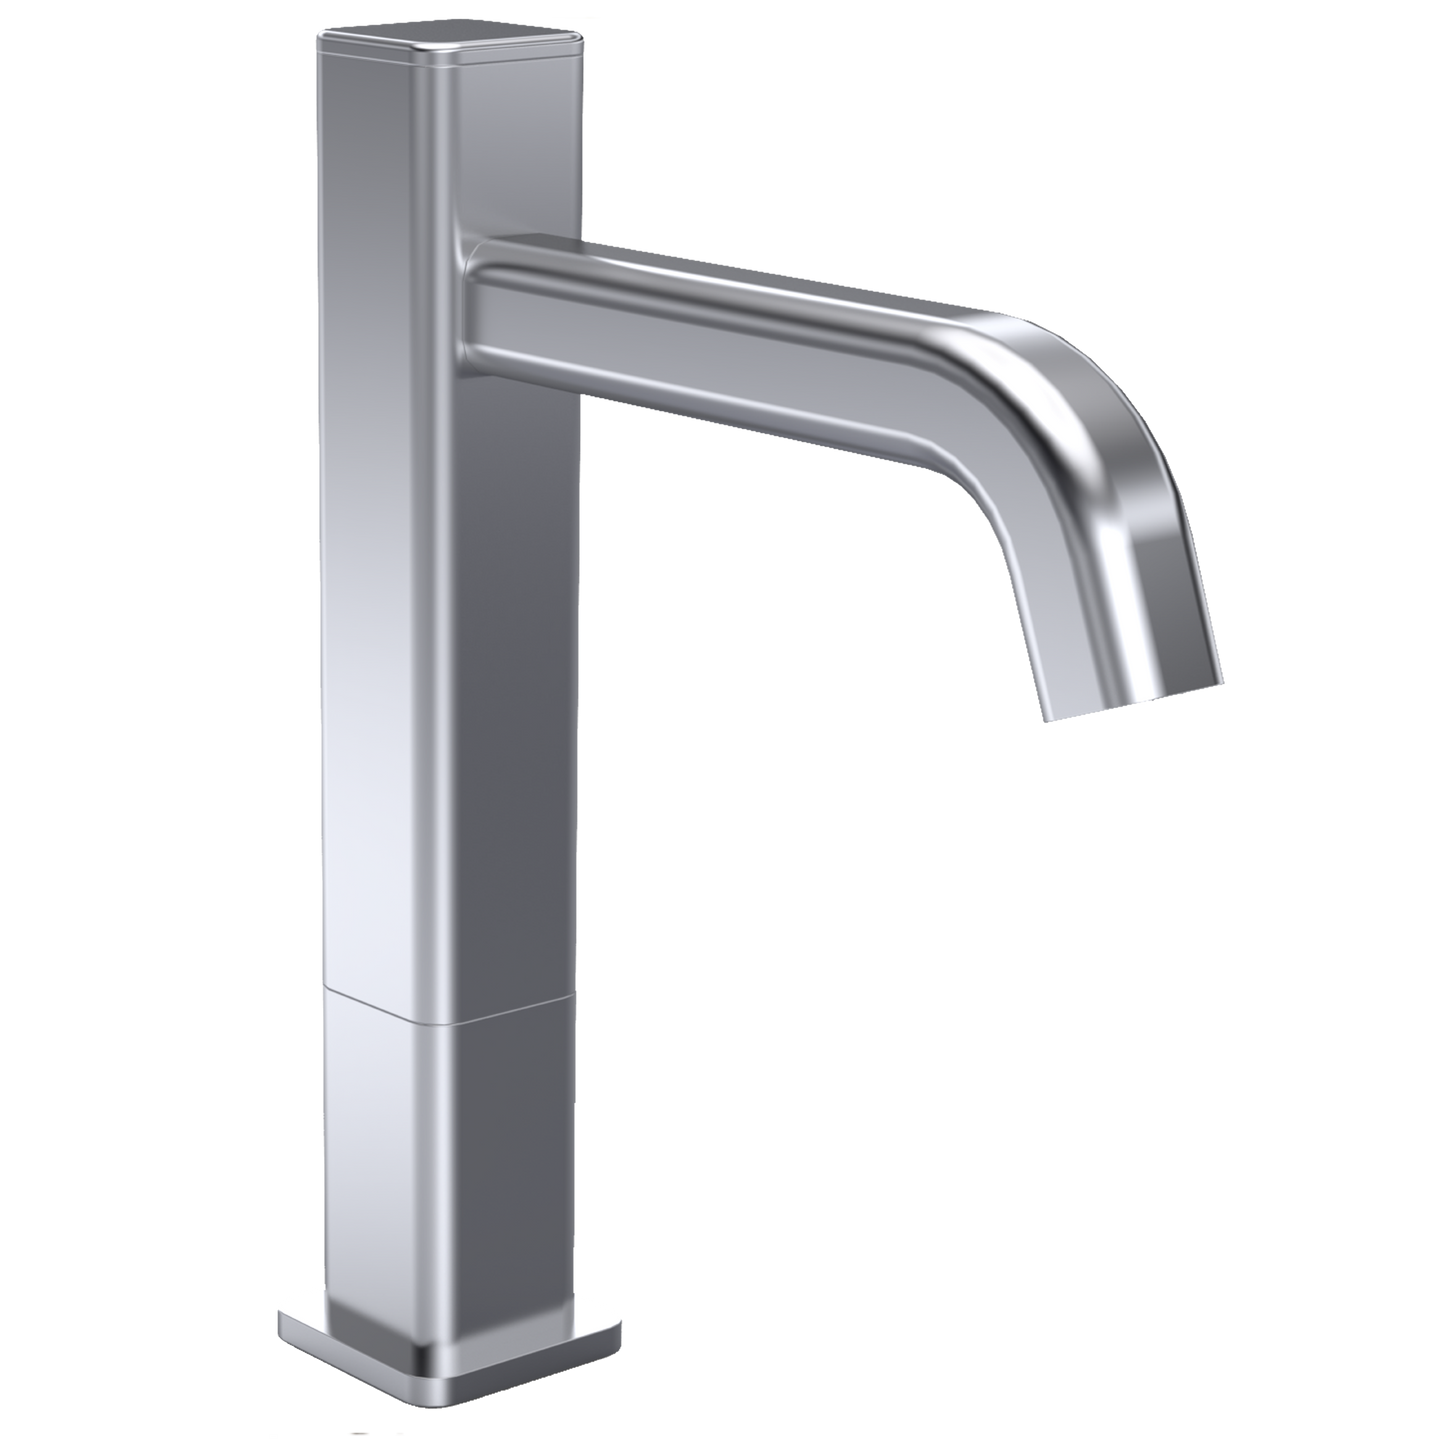 FA-3483 Automatic Faucet with 8” Spout Reach and 3” Riser